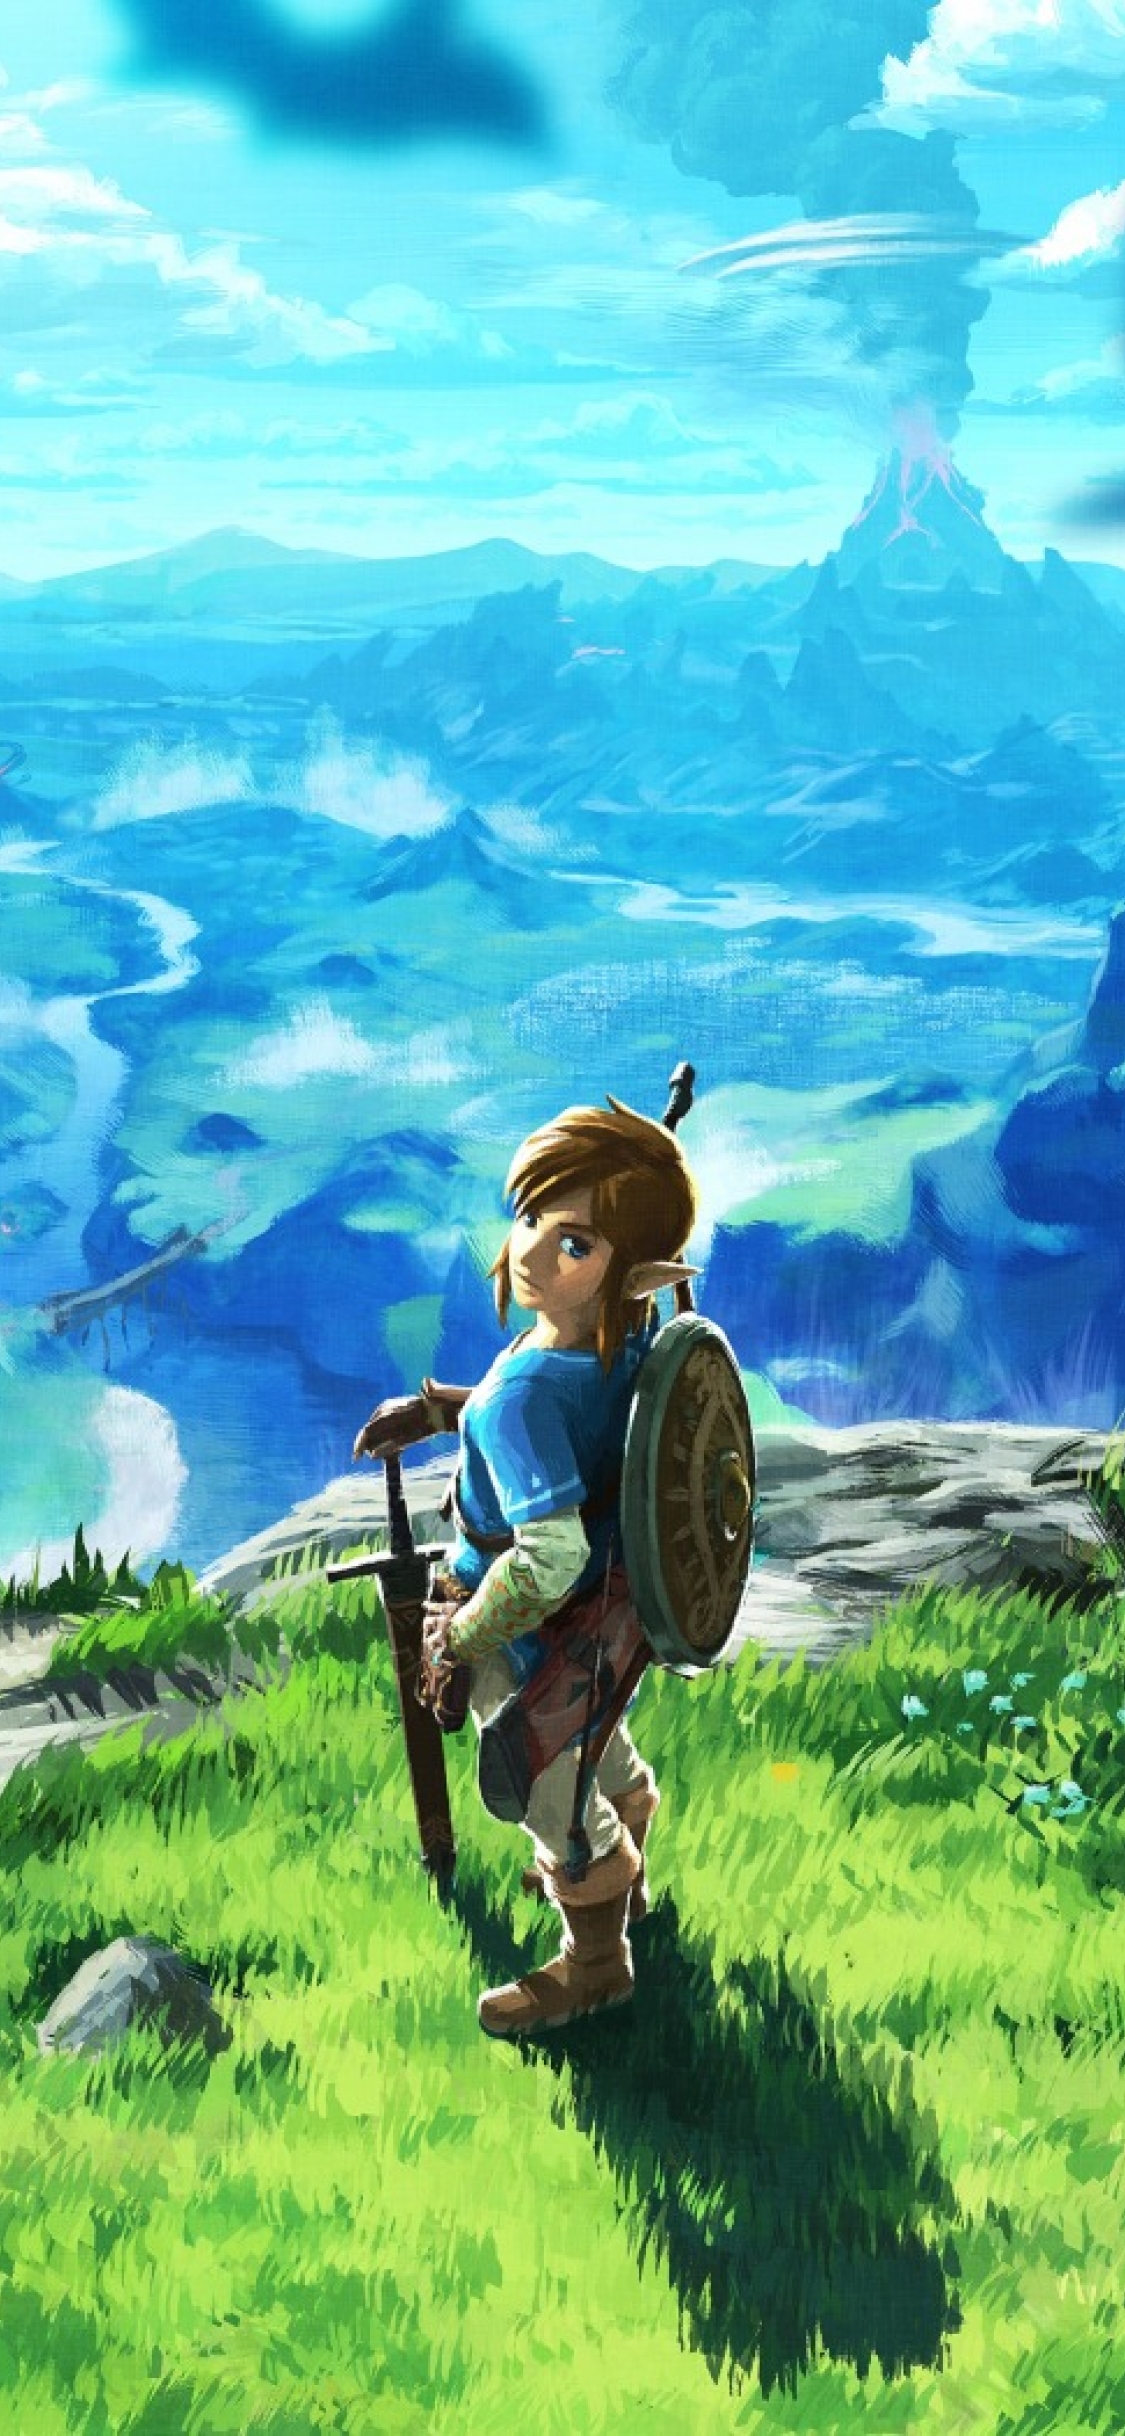 1125x2436 Legend Of Zelda Breath Of The Wild Art Iphone Xs Iphone 10 Iphone X Wallpaper Hd Games 4k Wallpapers Images Photos And Background Wallpapers Den